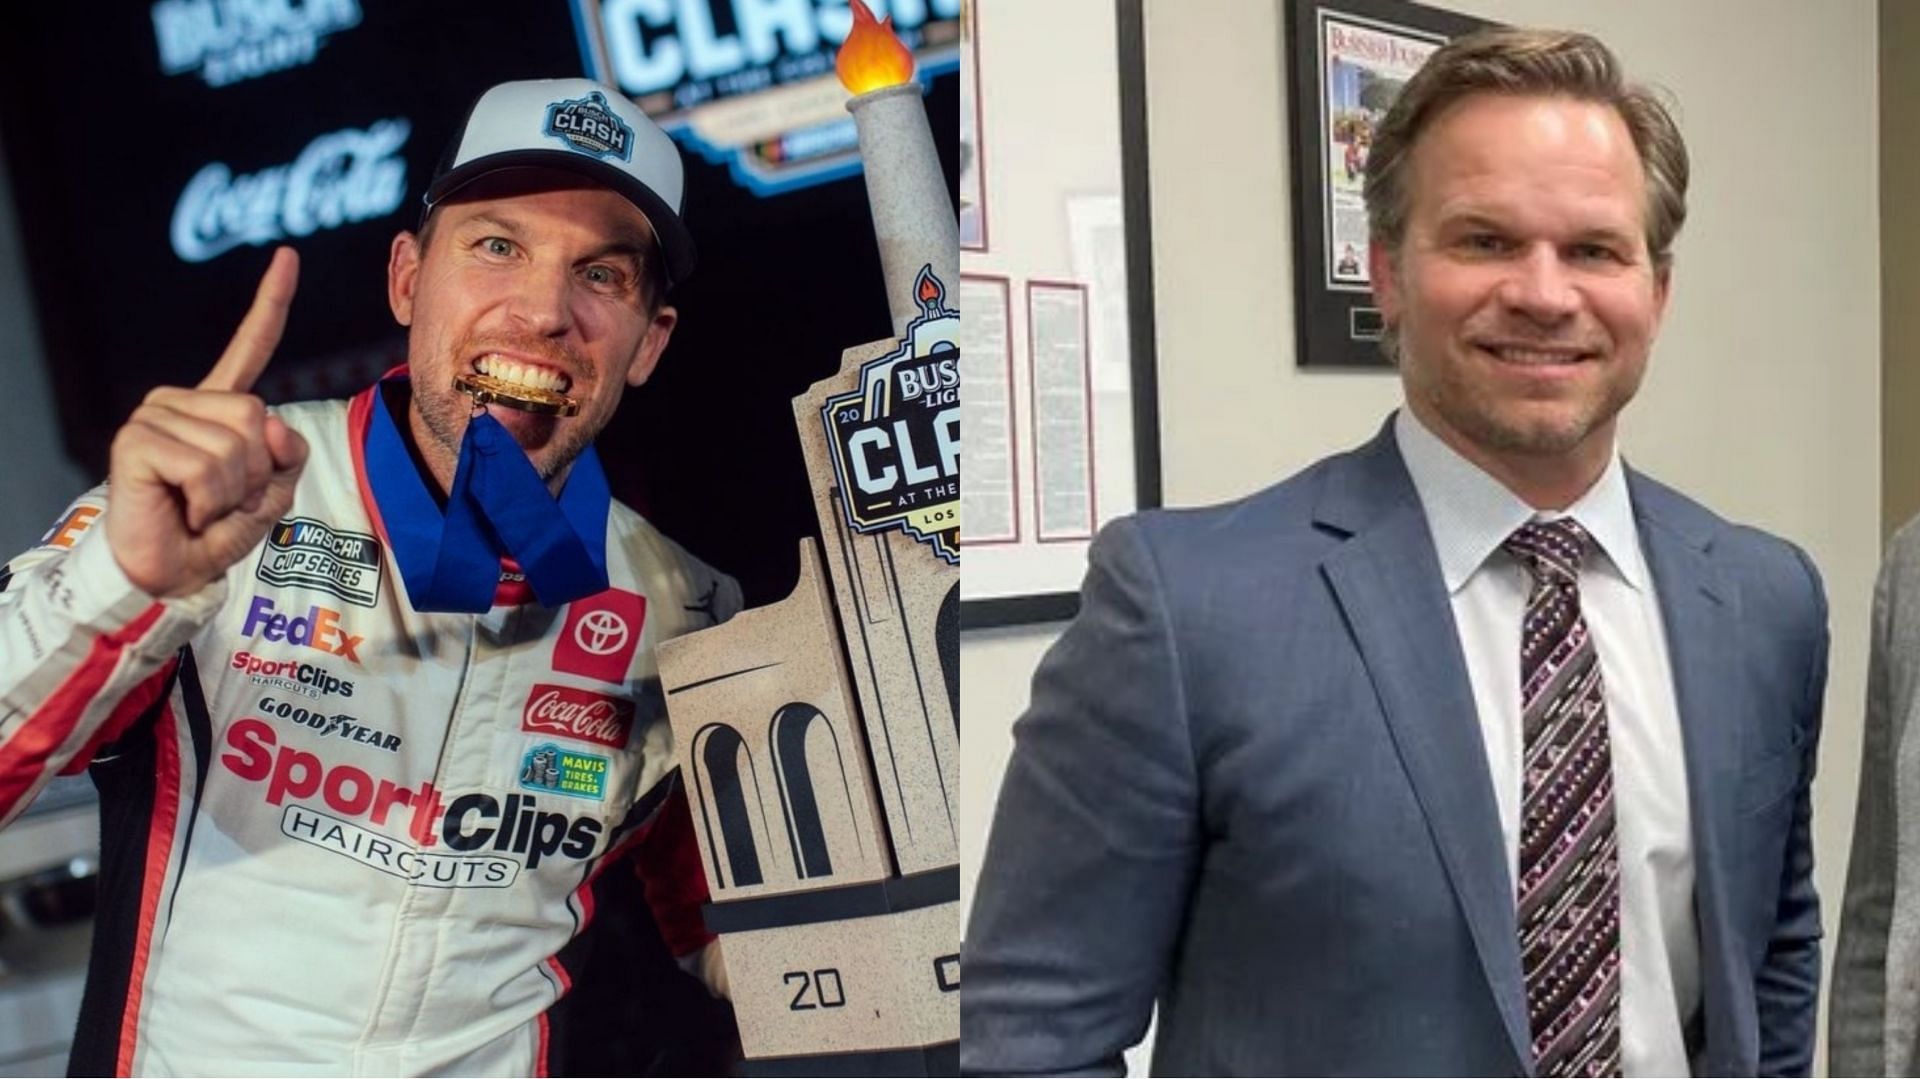 NASCAR driver Denny Hamlin on the left and Speedway Motorsports CEO Marcus Smith on the right (Image from X)